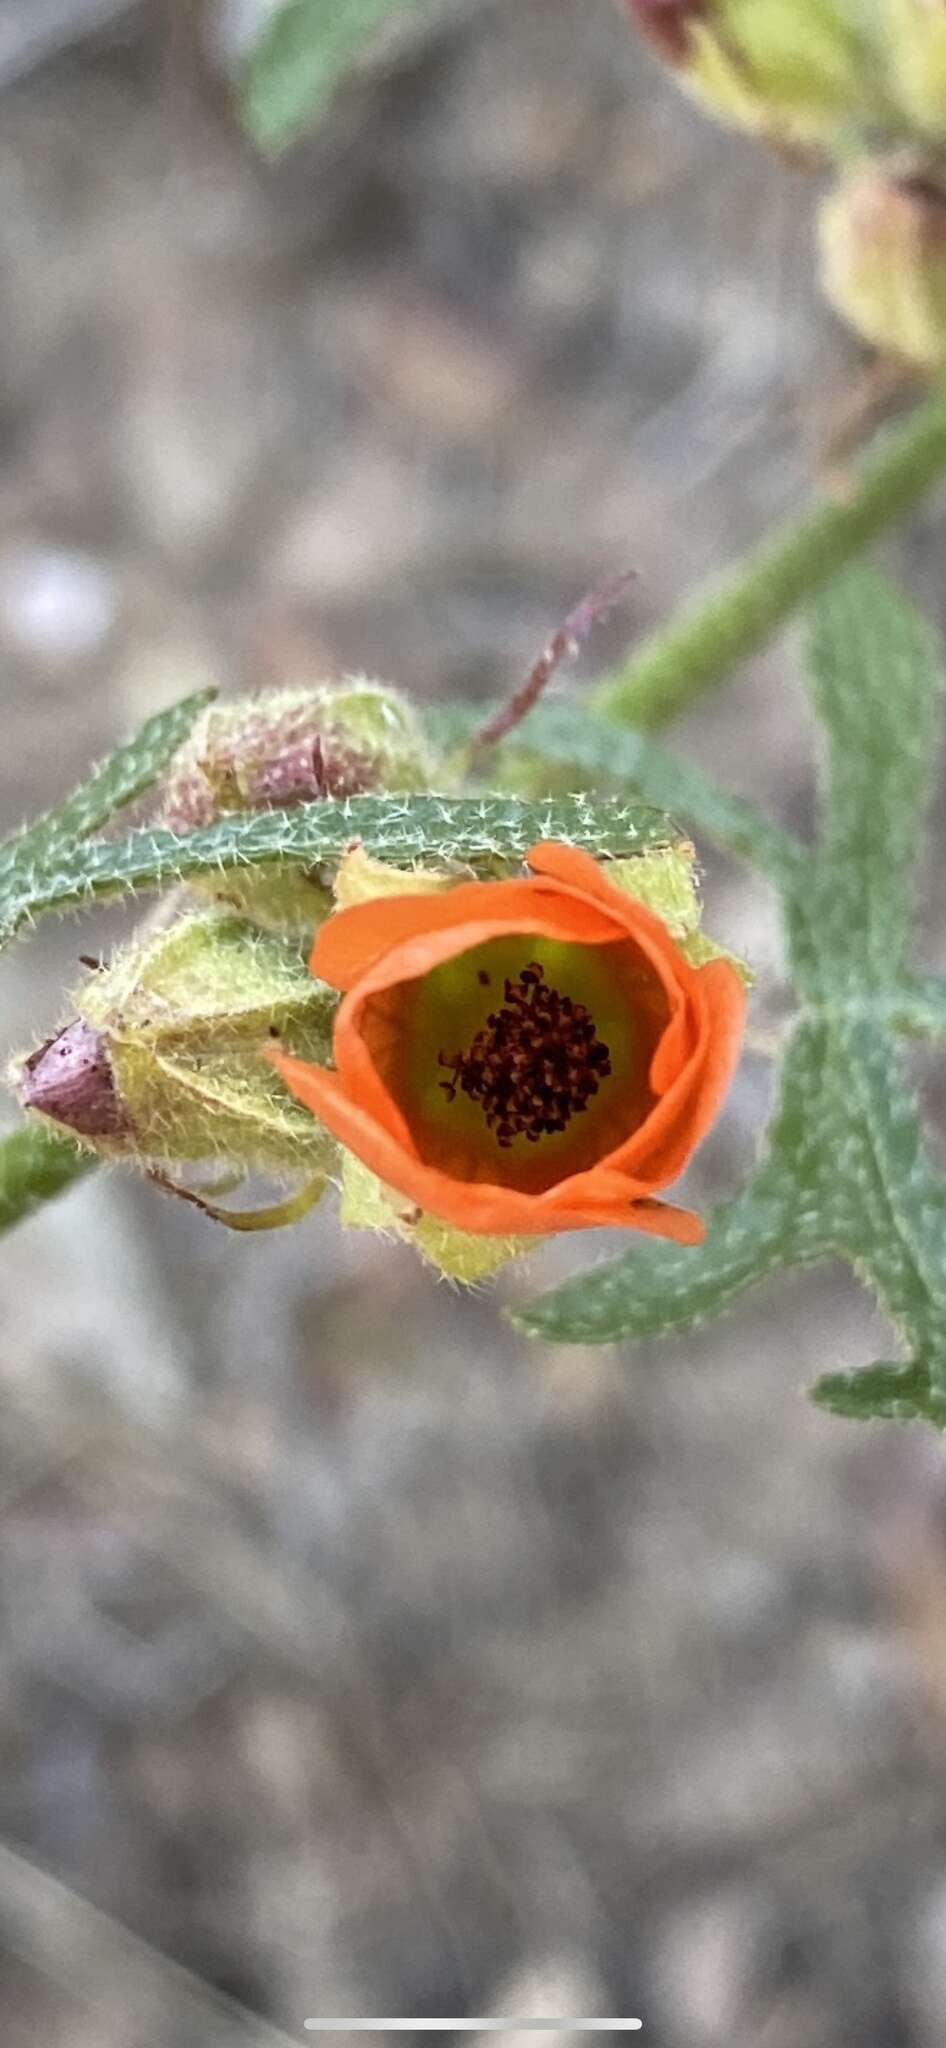 Image of Rusby's globemallow